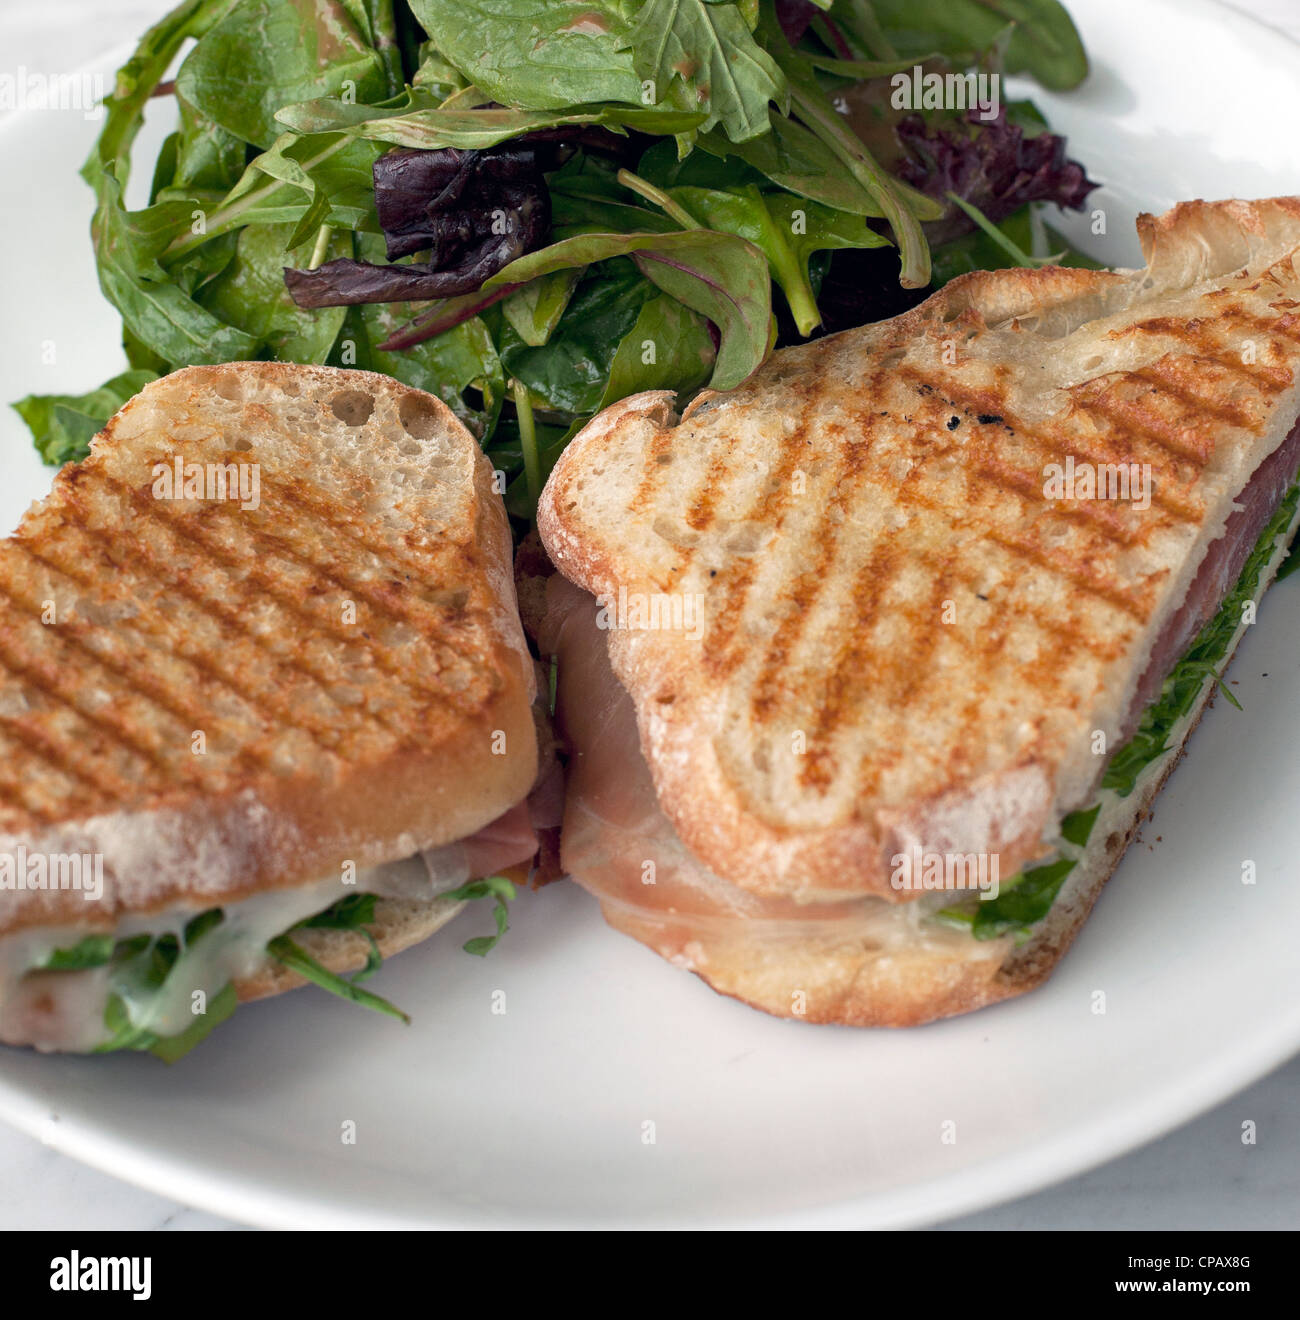 Lunch is panini and salad today. Stock Photo